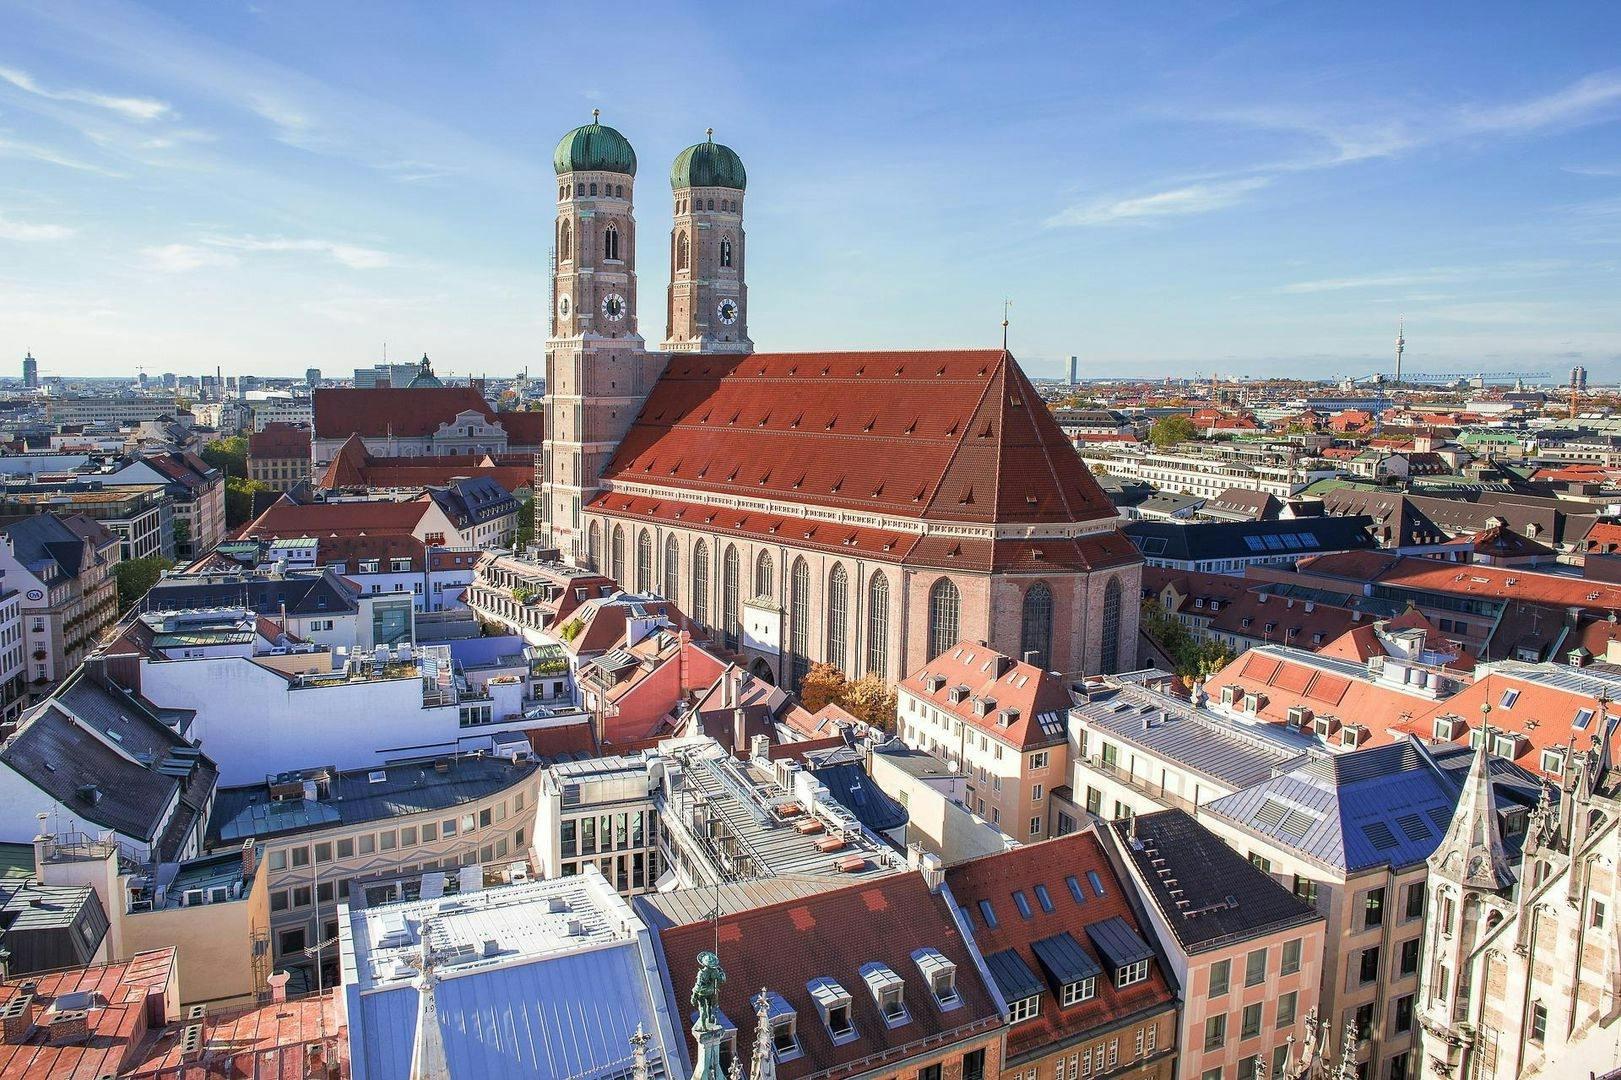 Audio walking tour of Munich, the capital of Bavaria and beer